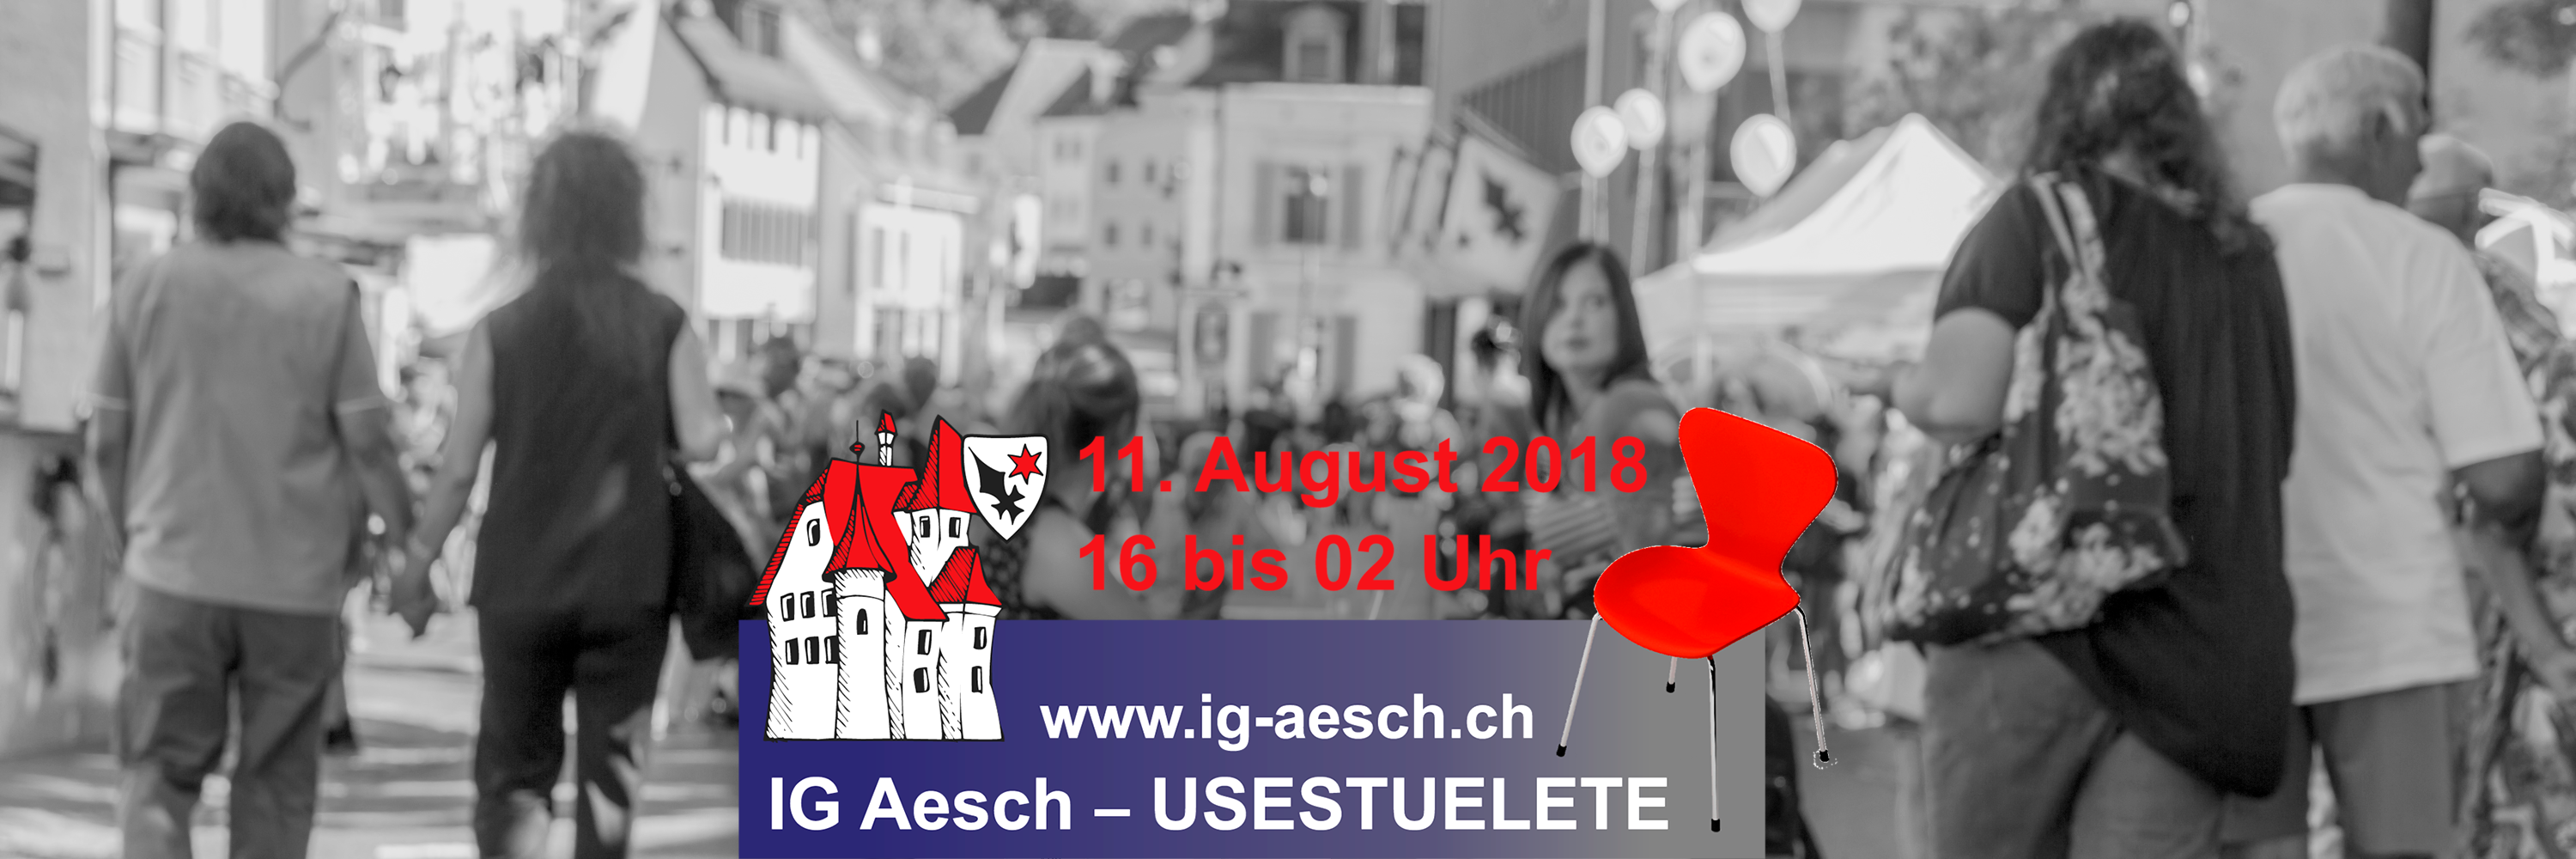 index.php/events/ig-aesch-usestuelete